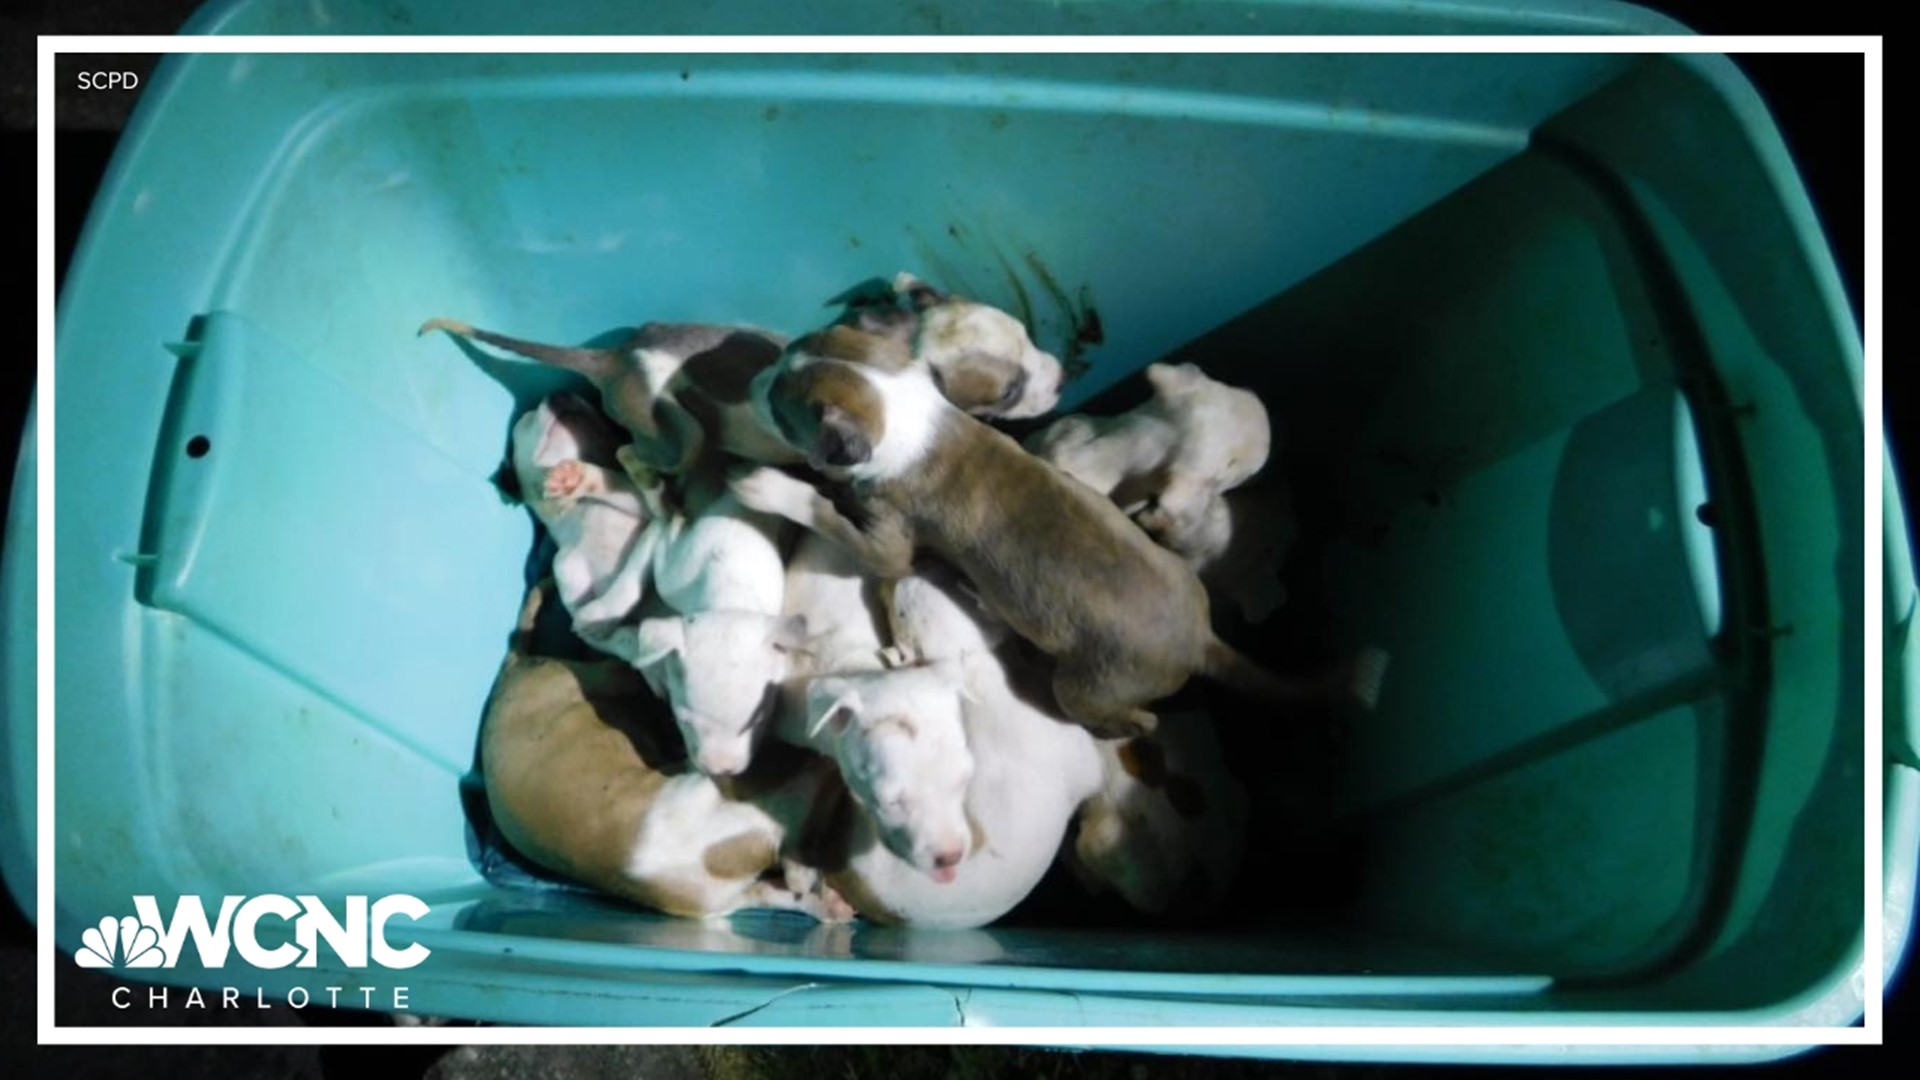 The Pit Bull puppies were without sufficient air, shelter, food and water and were covered in feces, according to police.